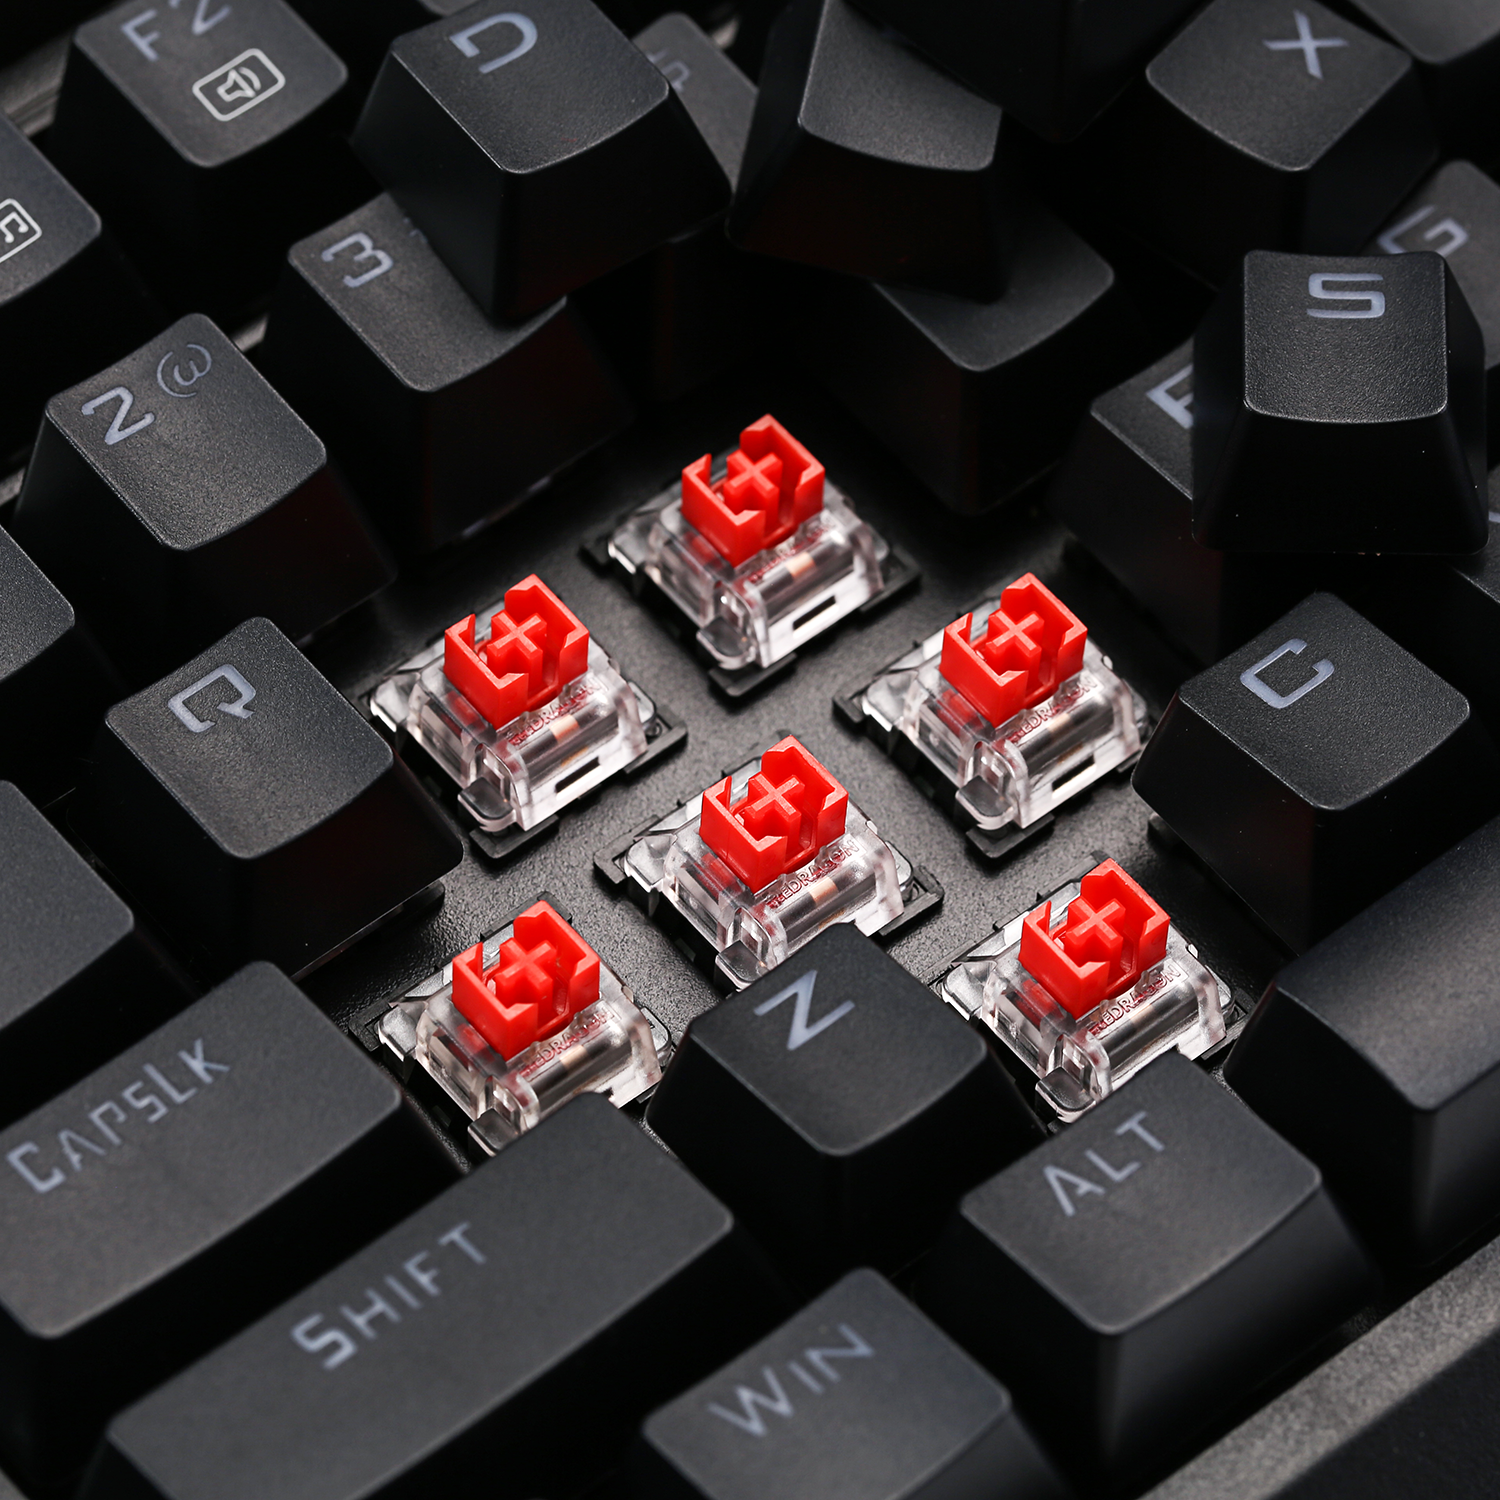 Redragon K596 tkl gaming keyboard with red switches